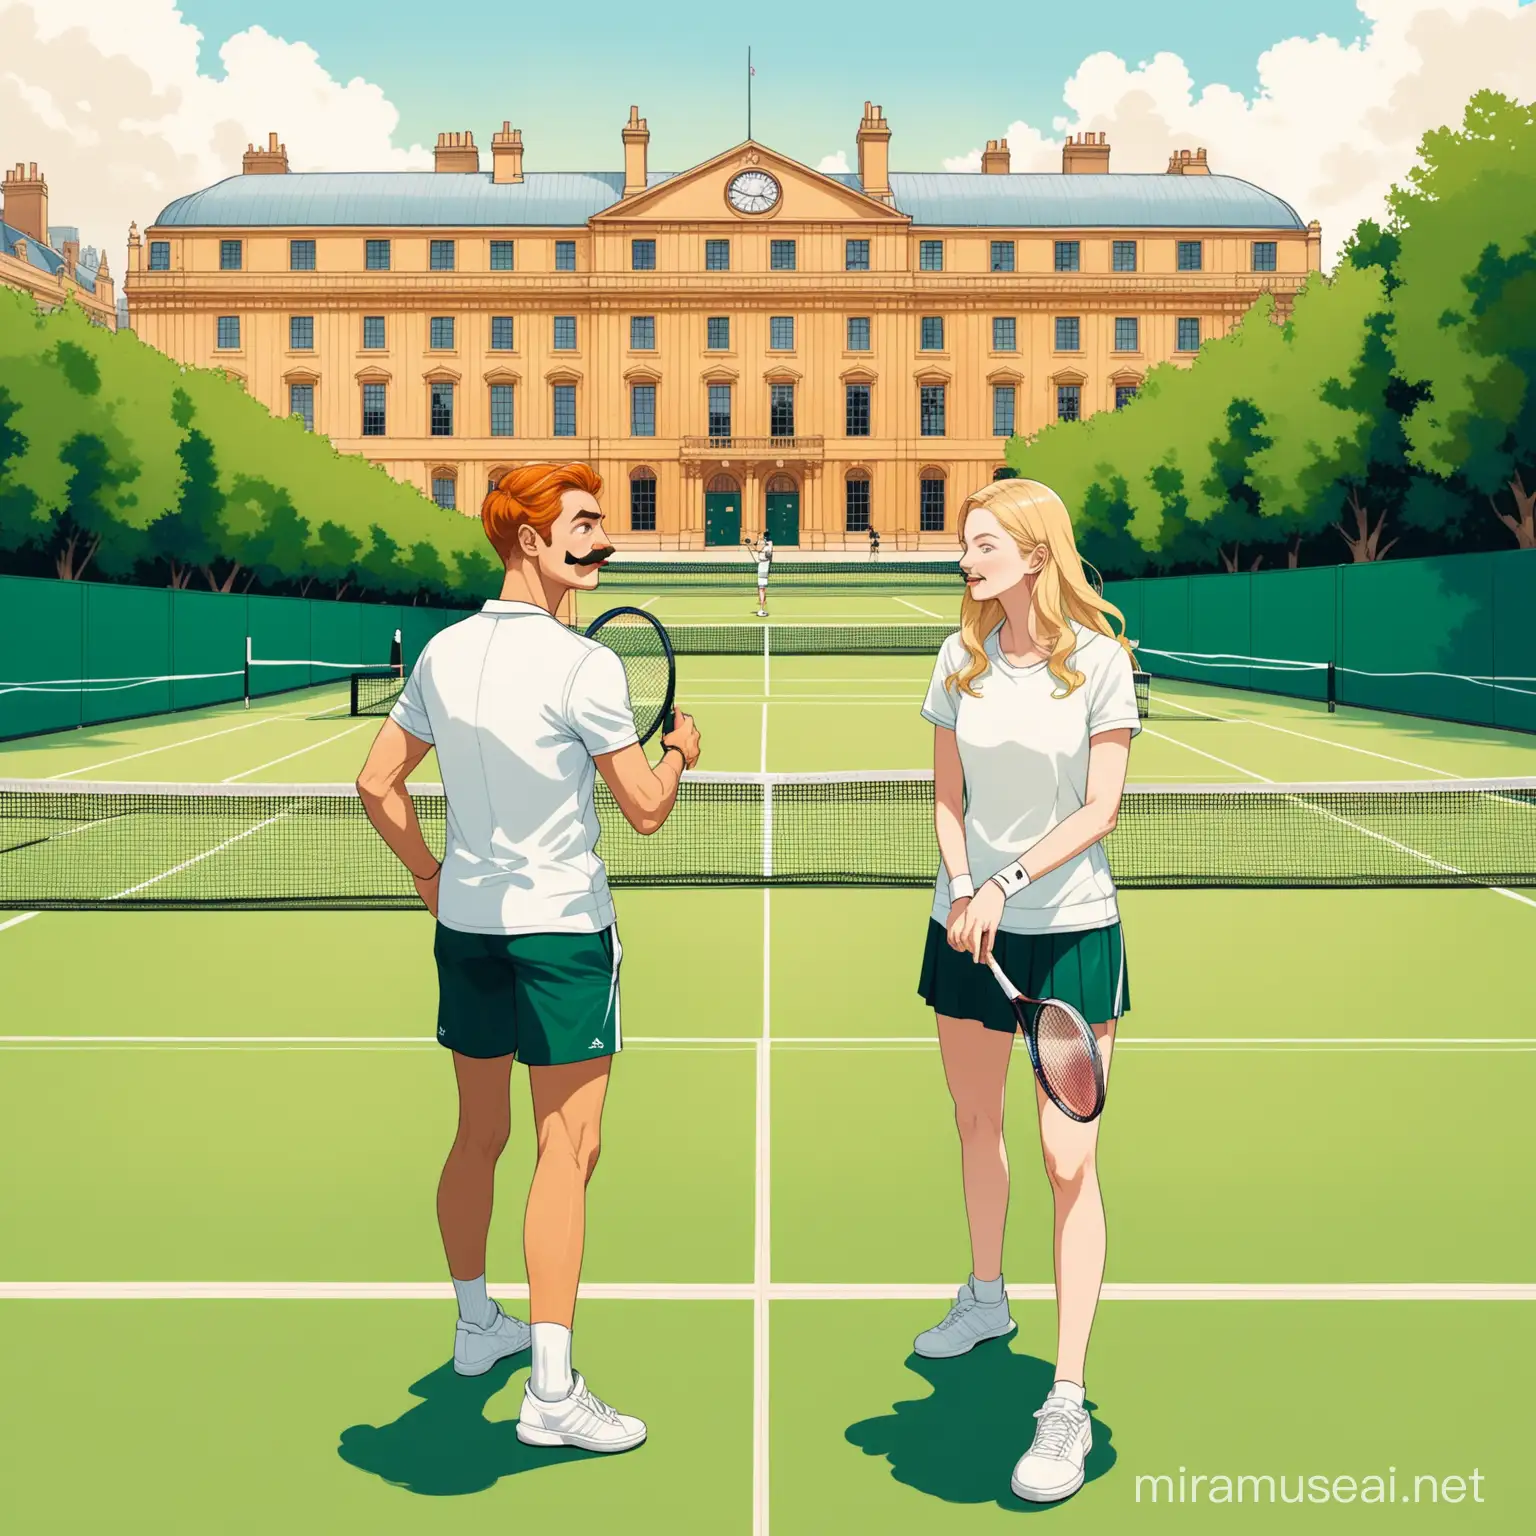 Artistic Rendering of Two Best Friends Playing Tennis Amidst Londons Urban Oasis